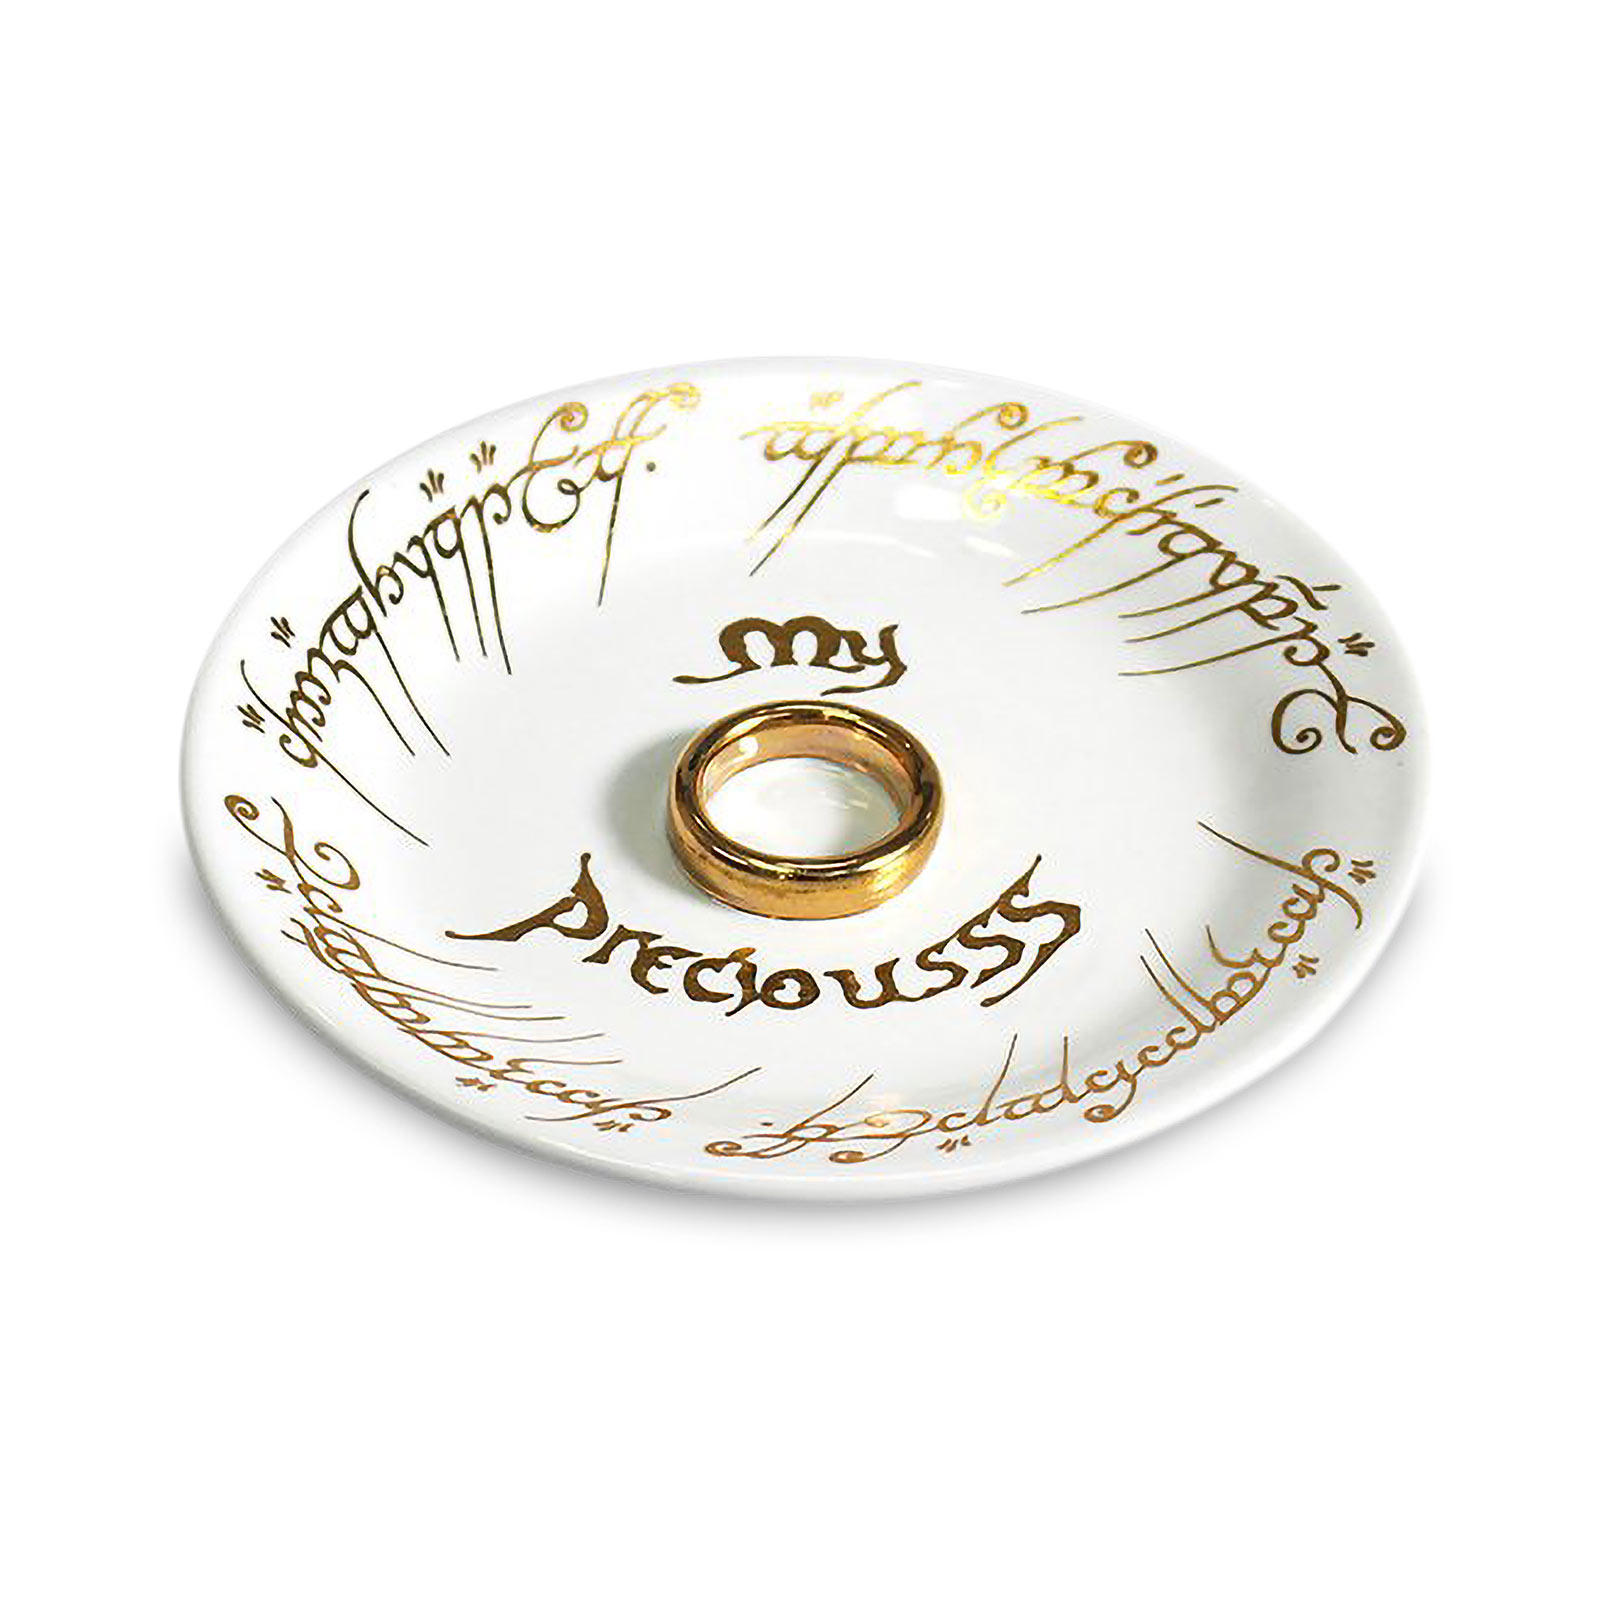 Lord of the Rings - The One Ring Jewelry Plate